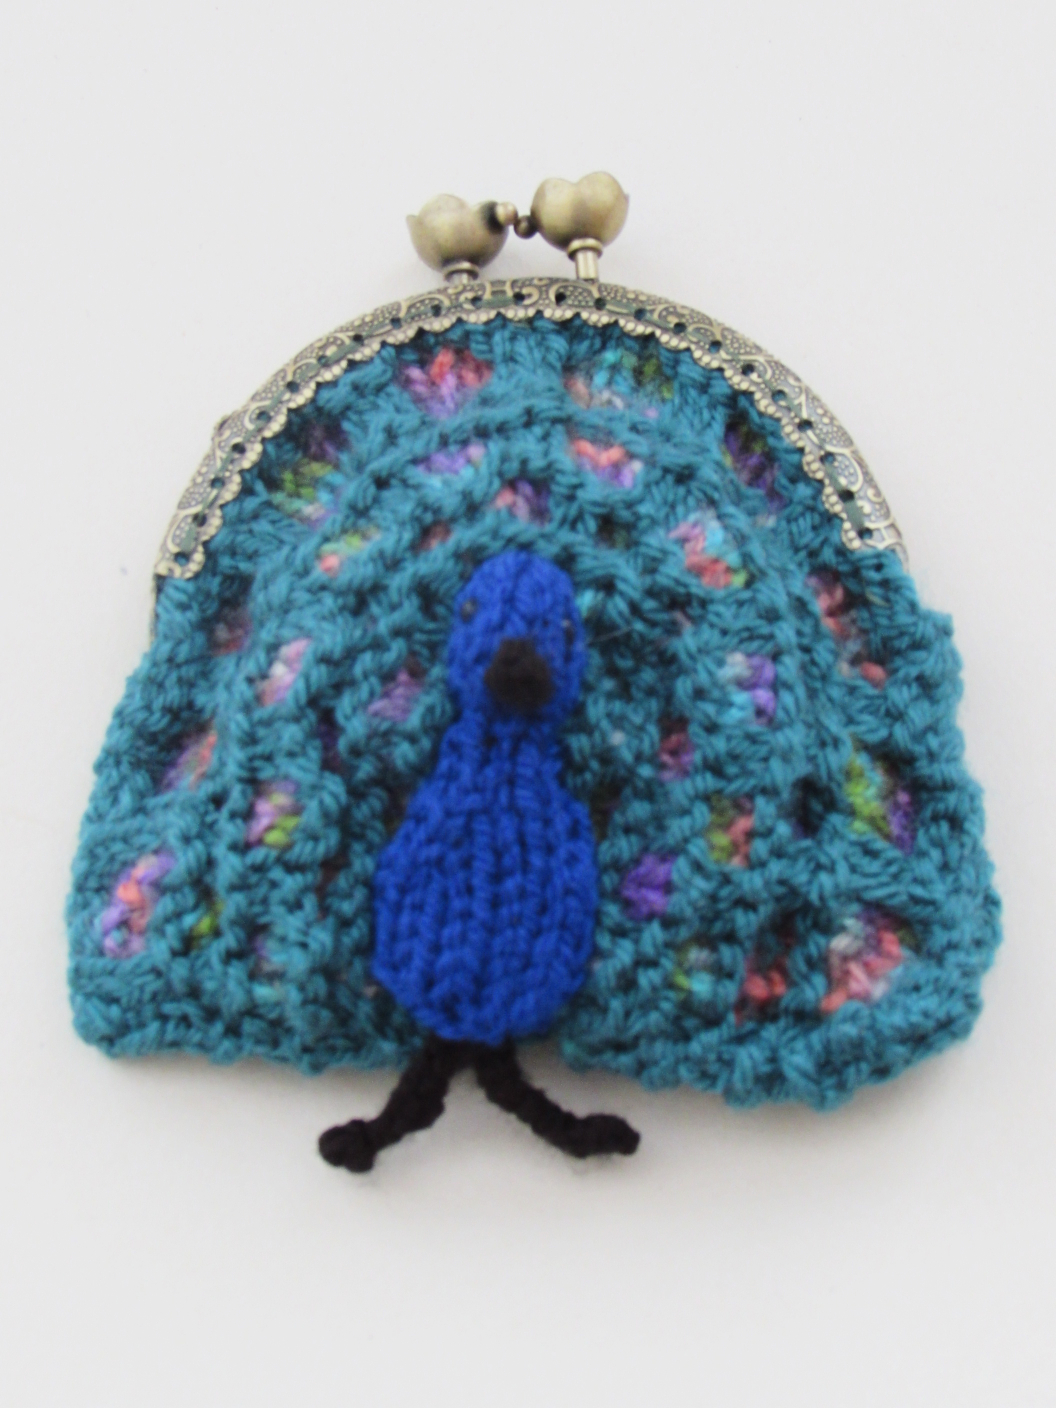 Peacock Coin Purse knitting pattern